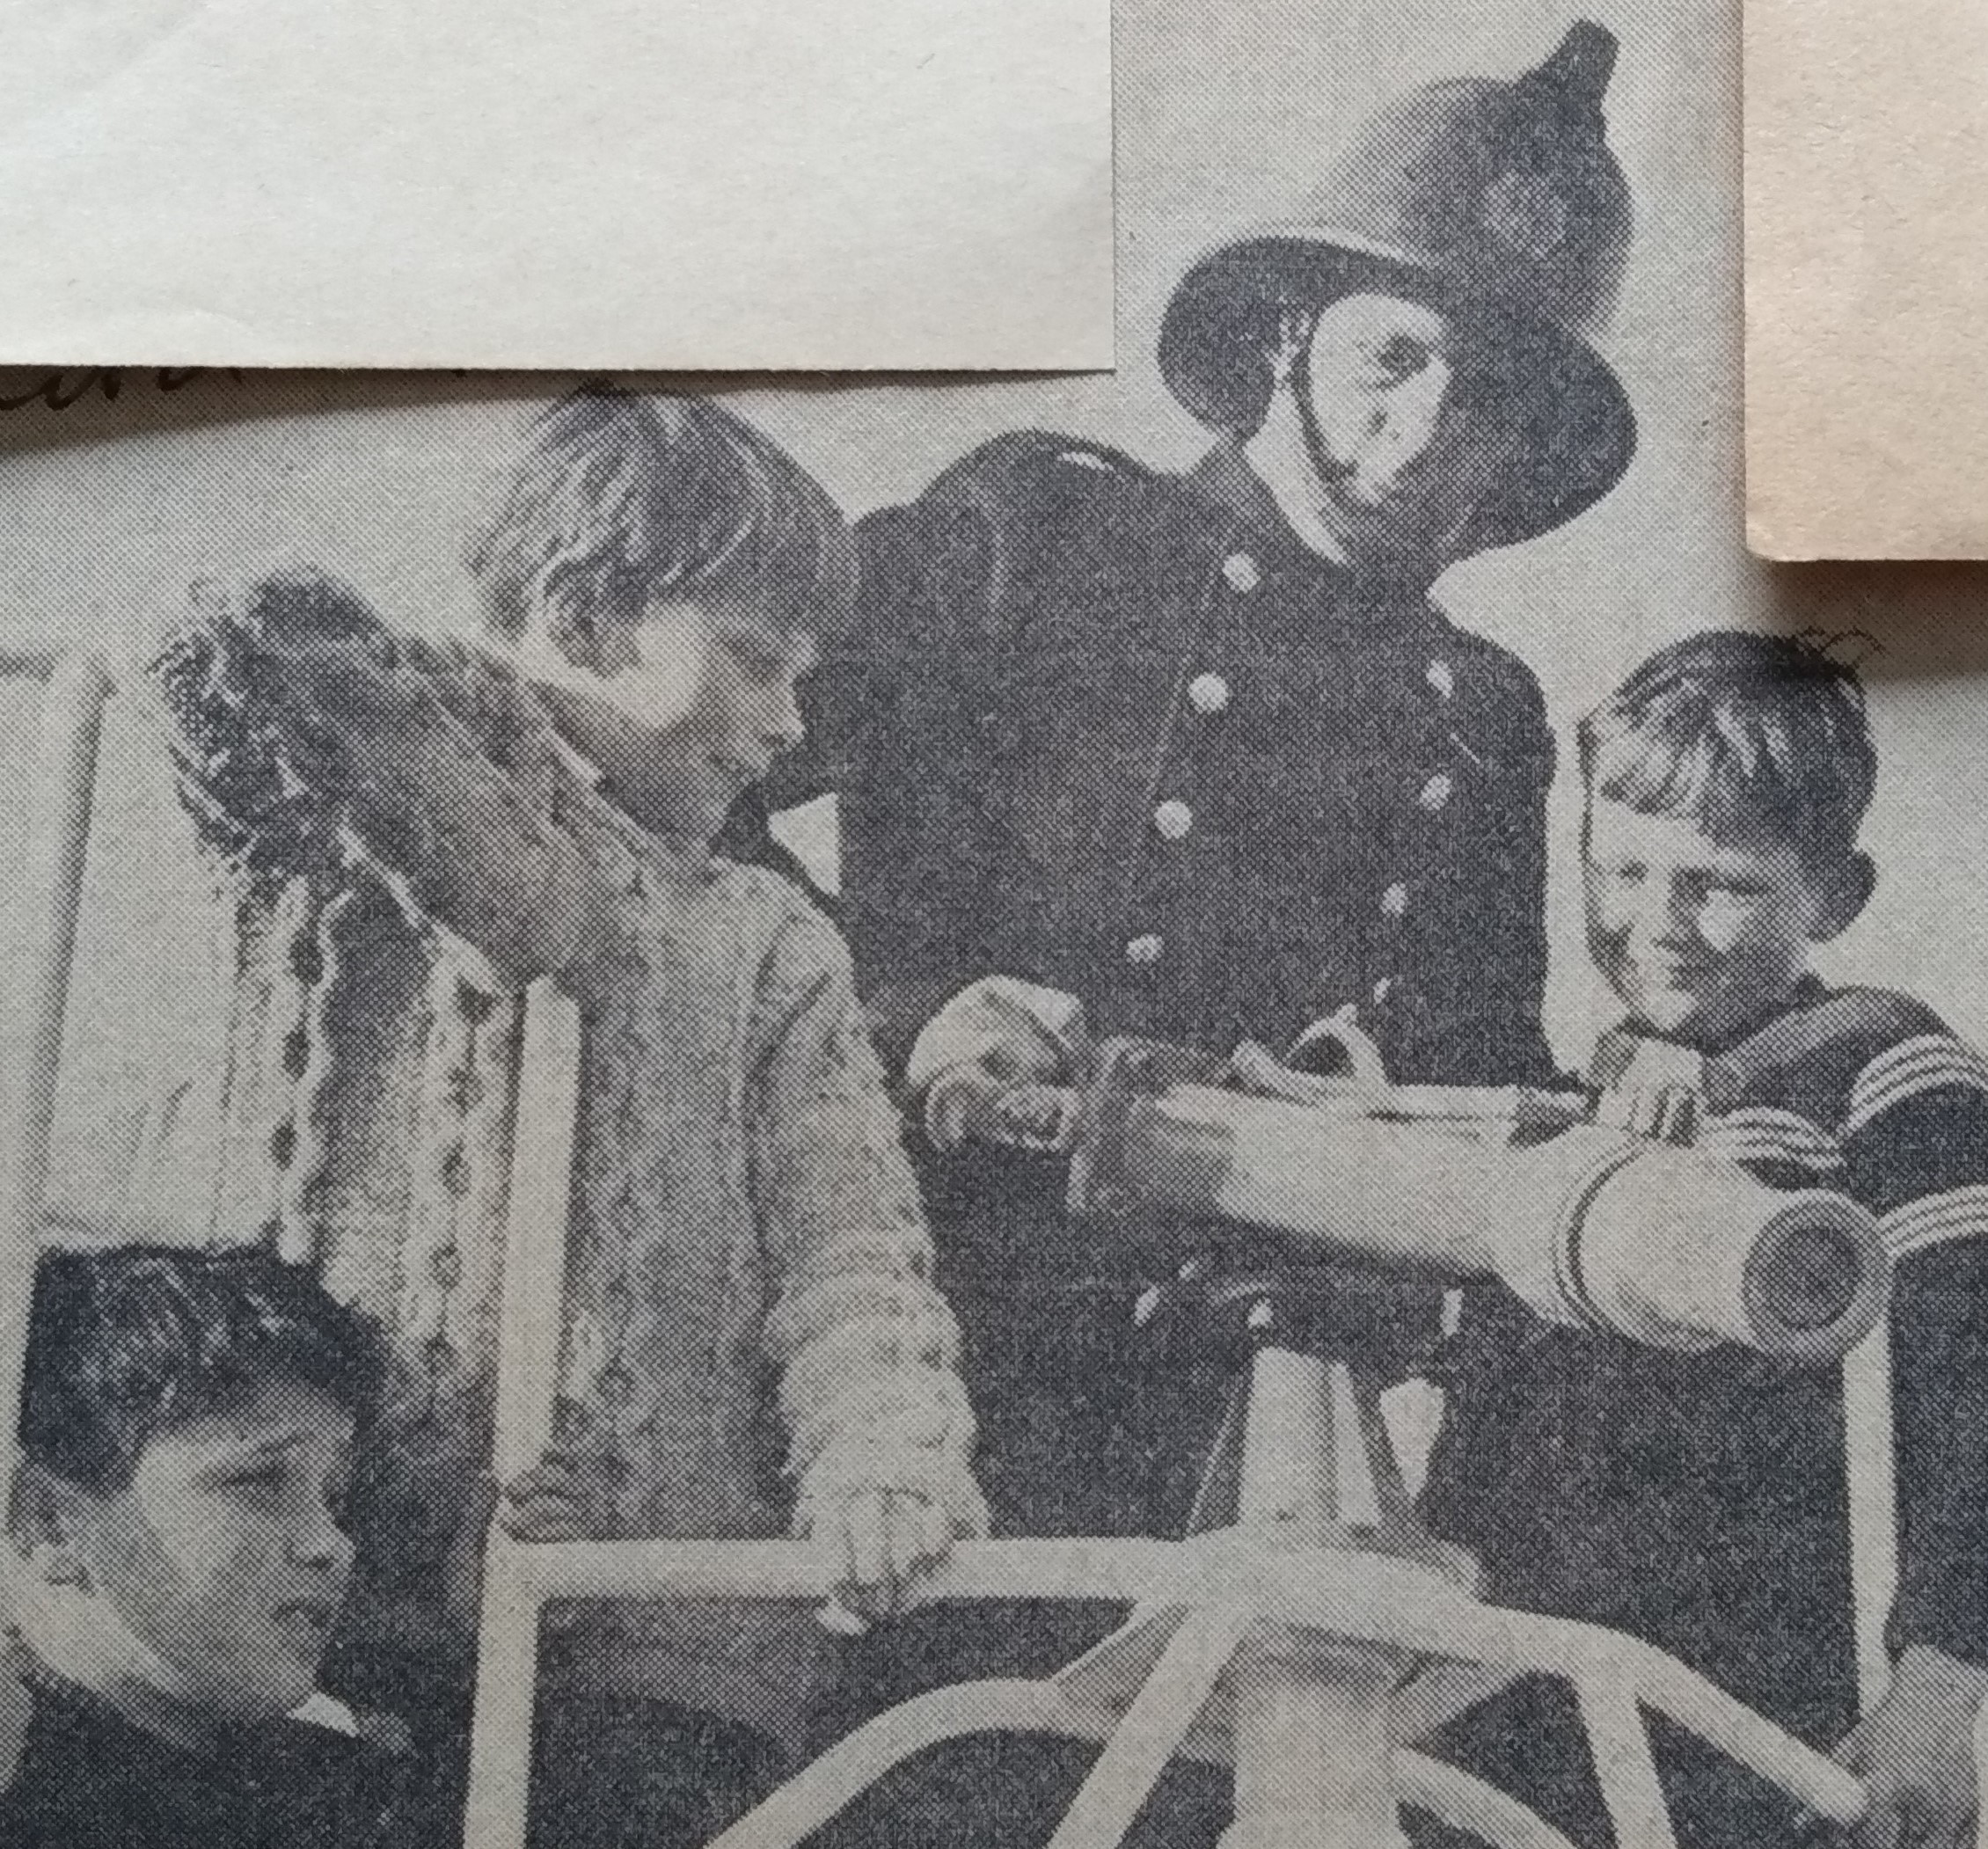 May 1966 saw Fireman D Price showing Robert Wood, aged 11, left, and John Wright, 10, how the “Snorkel” works at a display at the opening of Pershore Fire Station and Civil Defence Station. Eight-year-old David Sefton looks like he’d